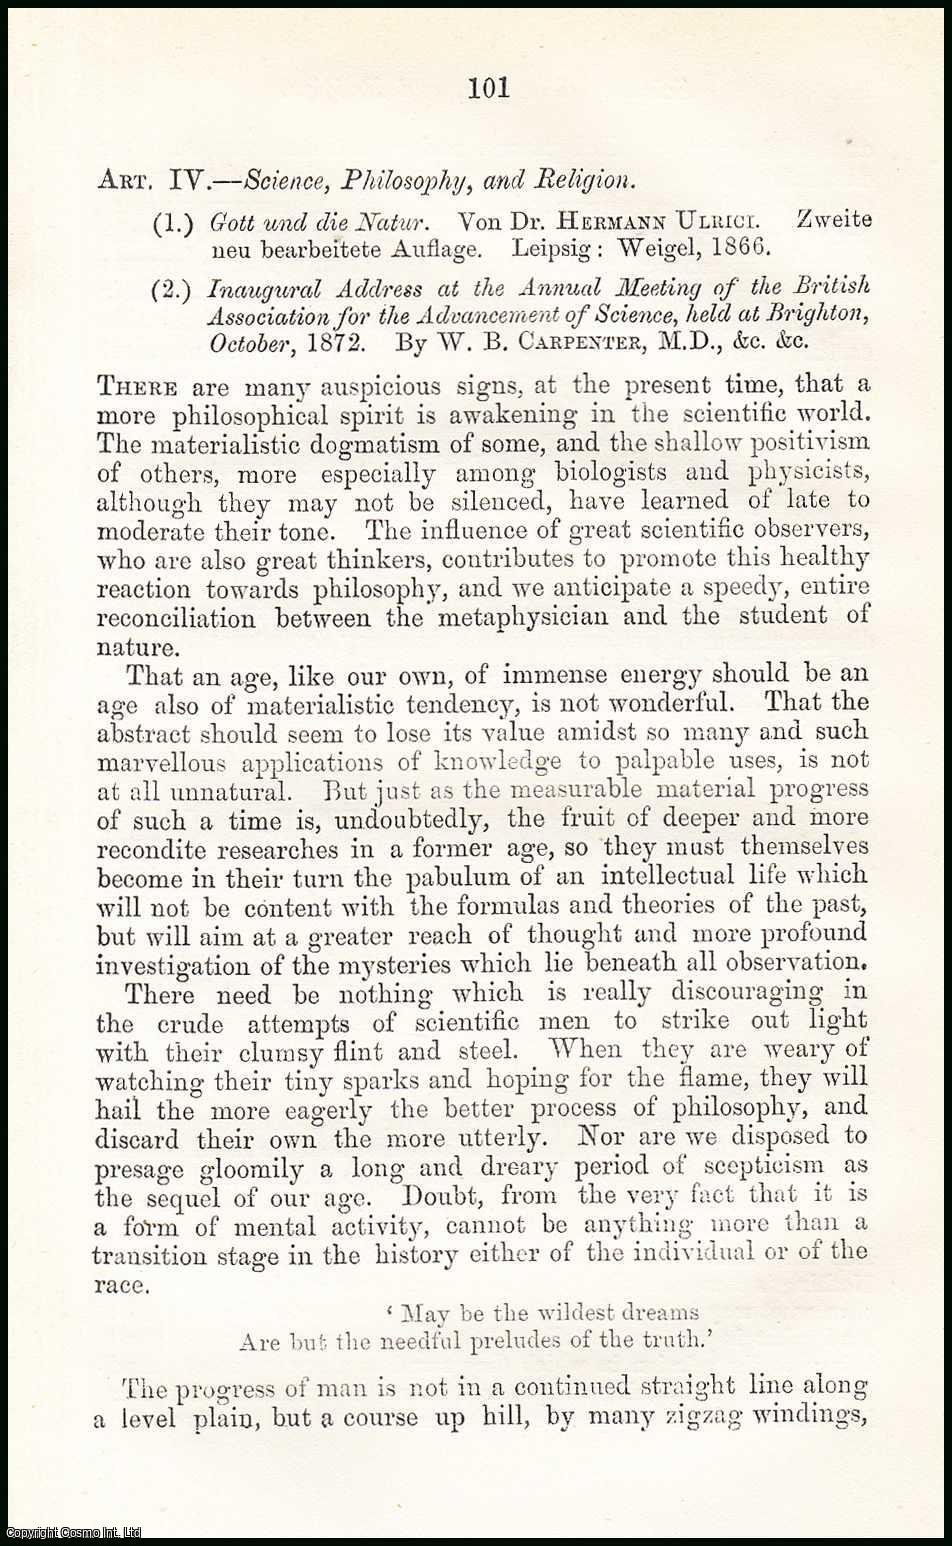 Author Unknown - Science, Philosophy, and Religion. A rare original article from the British Quarterly Review, 1874.